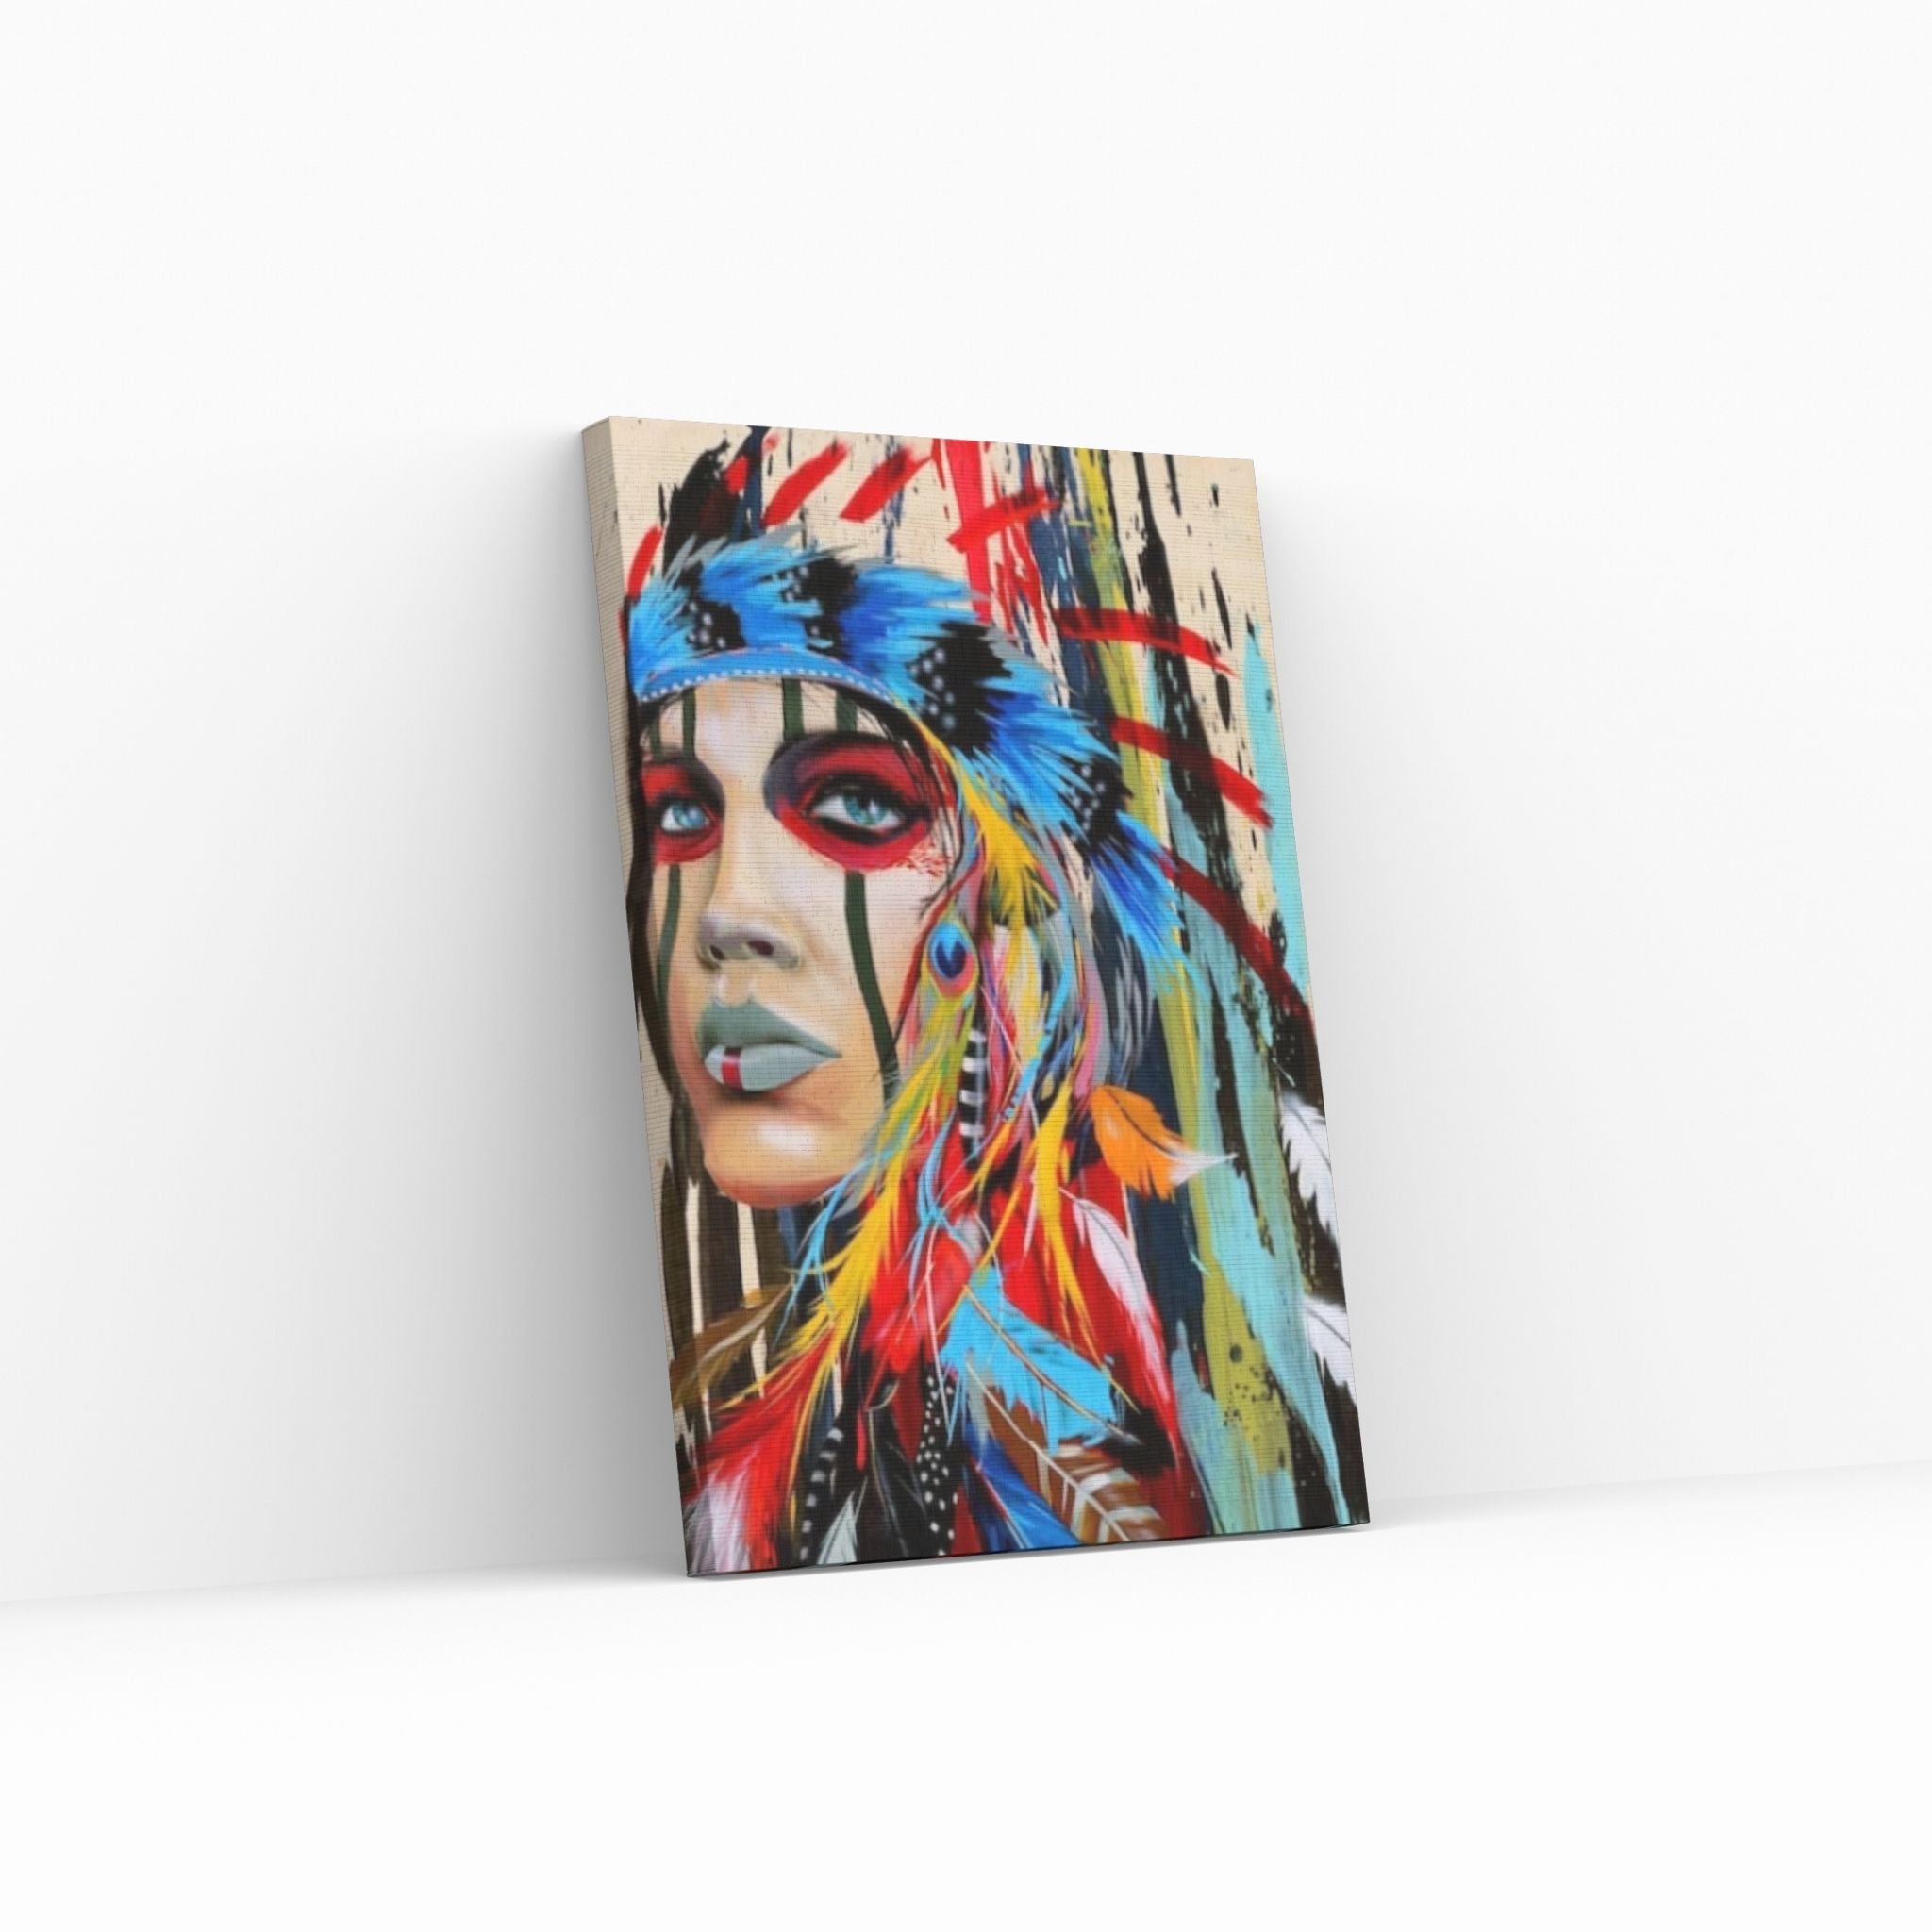 Native American Indian Girl Wall Art Canvas Painting Women, Wall Decor Pop Art - Y Canvas